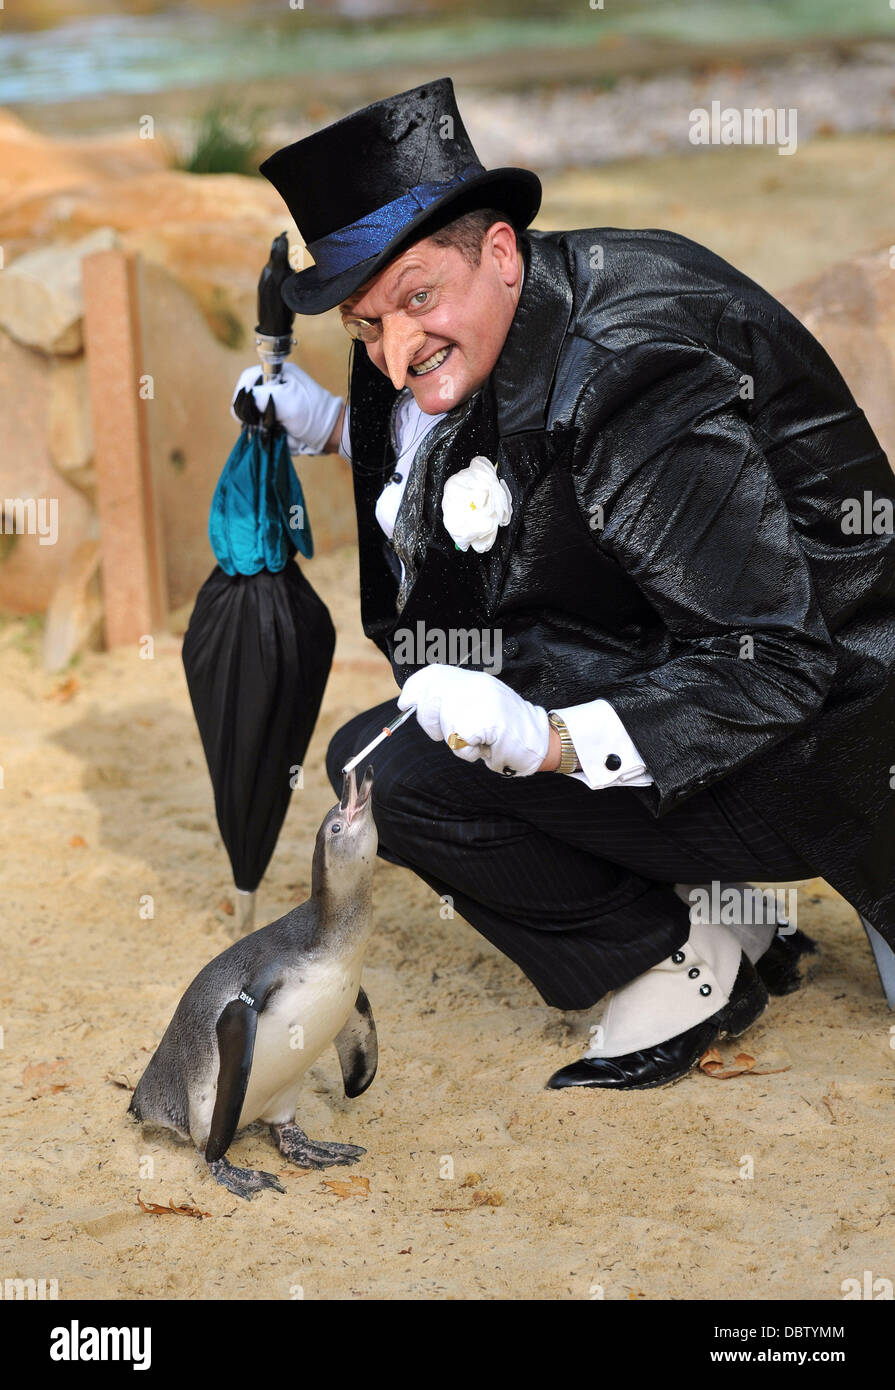 Real life Penguins and The Penguin from the Batman Live show meet on the new Penguin Beach at London Zoo. London, England - 22.08.11 Stock Photo